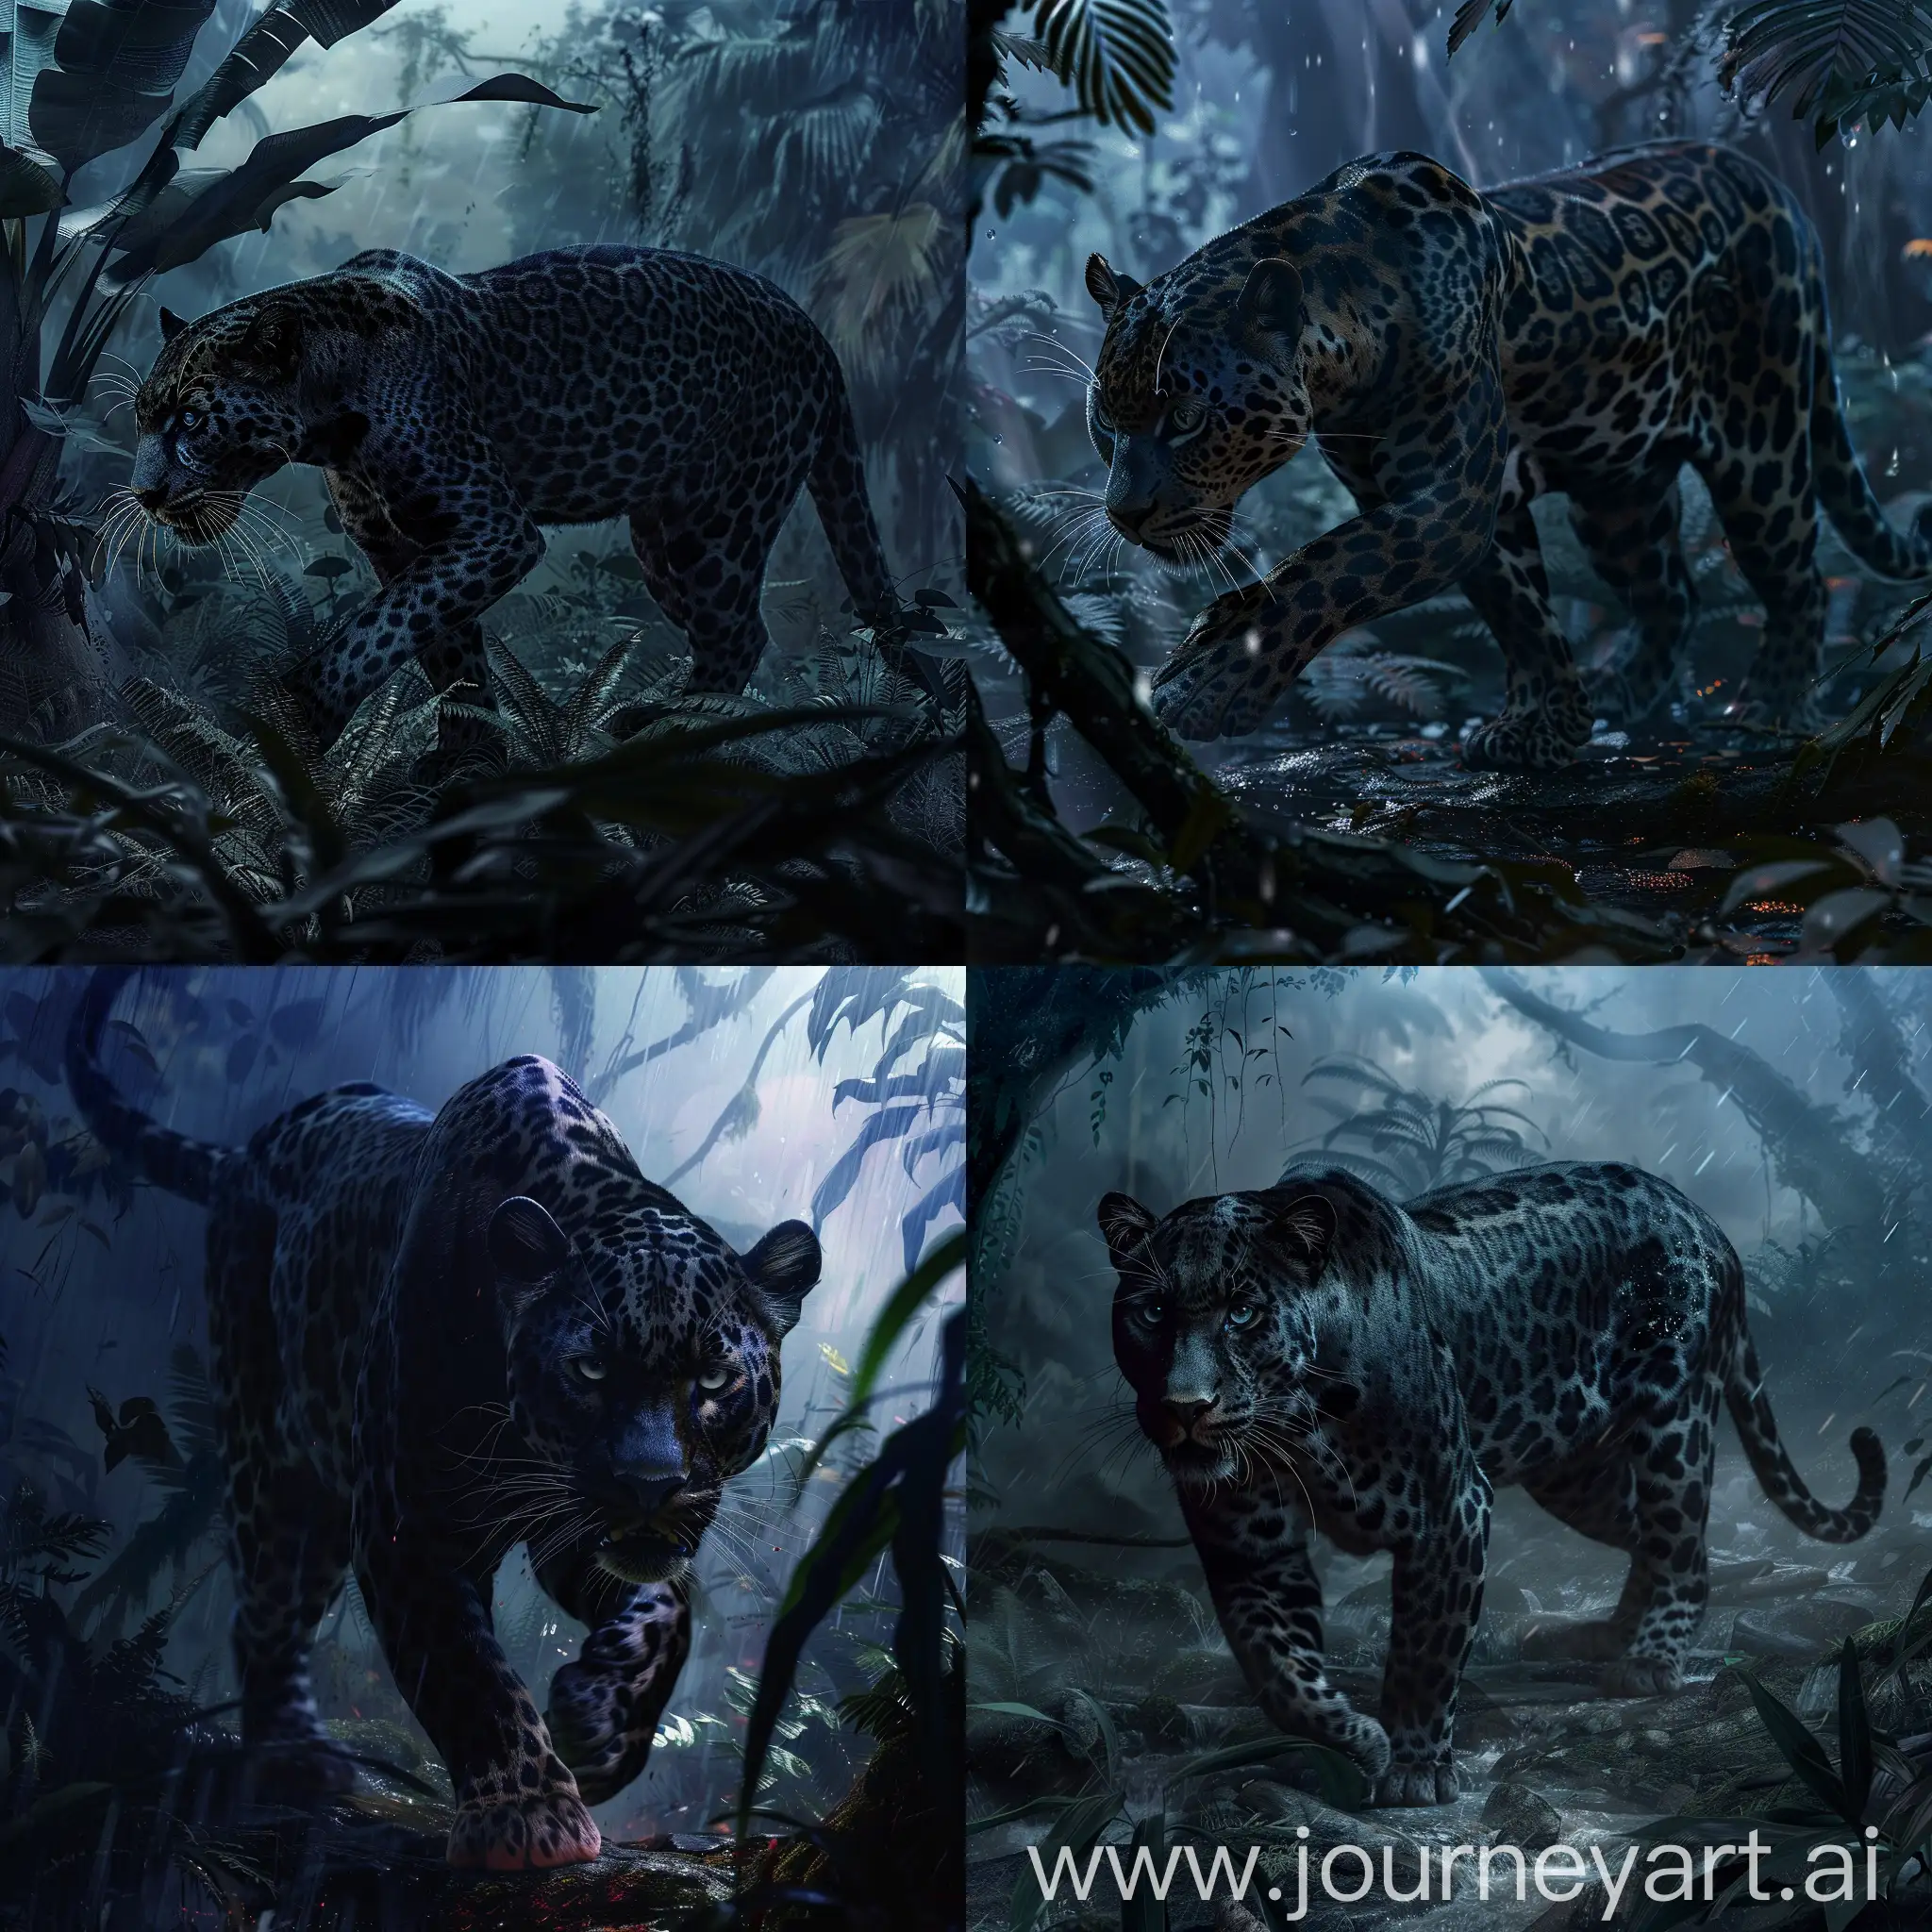 A sleek and stealthy panther, captured in ultra fine detail as it prowls through a dark and stormy jungle. The post-production color grading enhances the panther's natural beauty, while the deep shadows and shimmering reflections add an air of mystery and danger